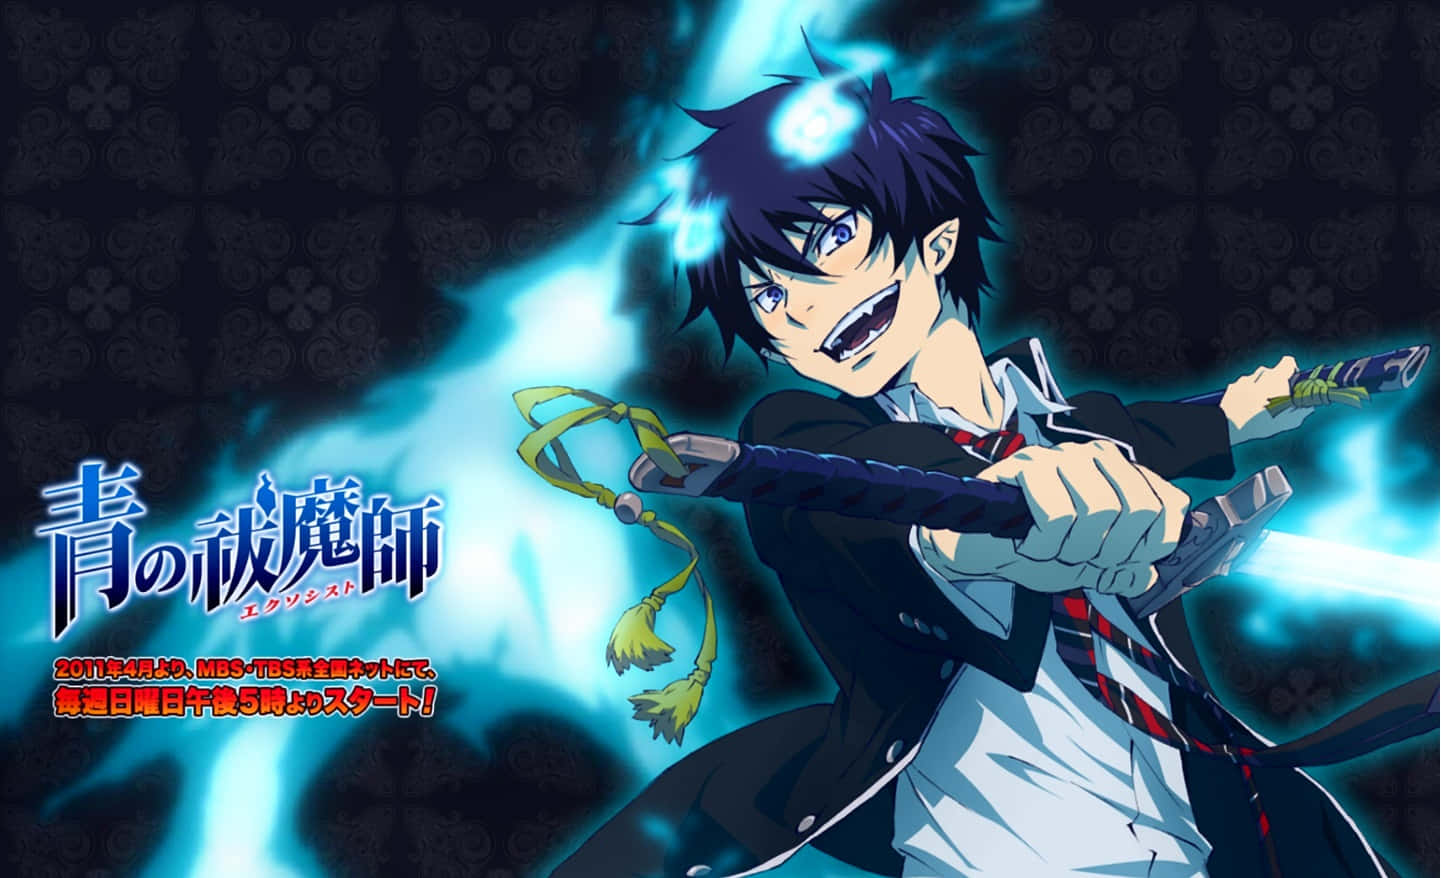 Anime Power Unleashed: Rin Okumura In Action Wallpaper